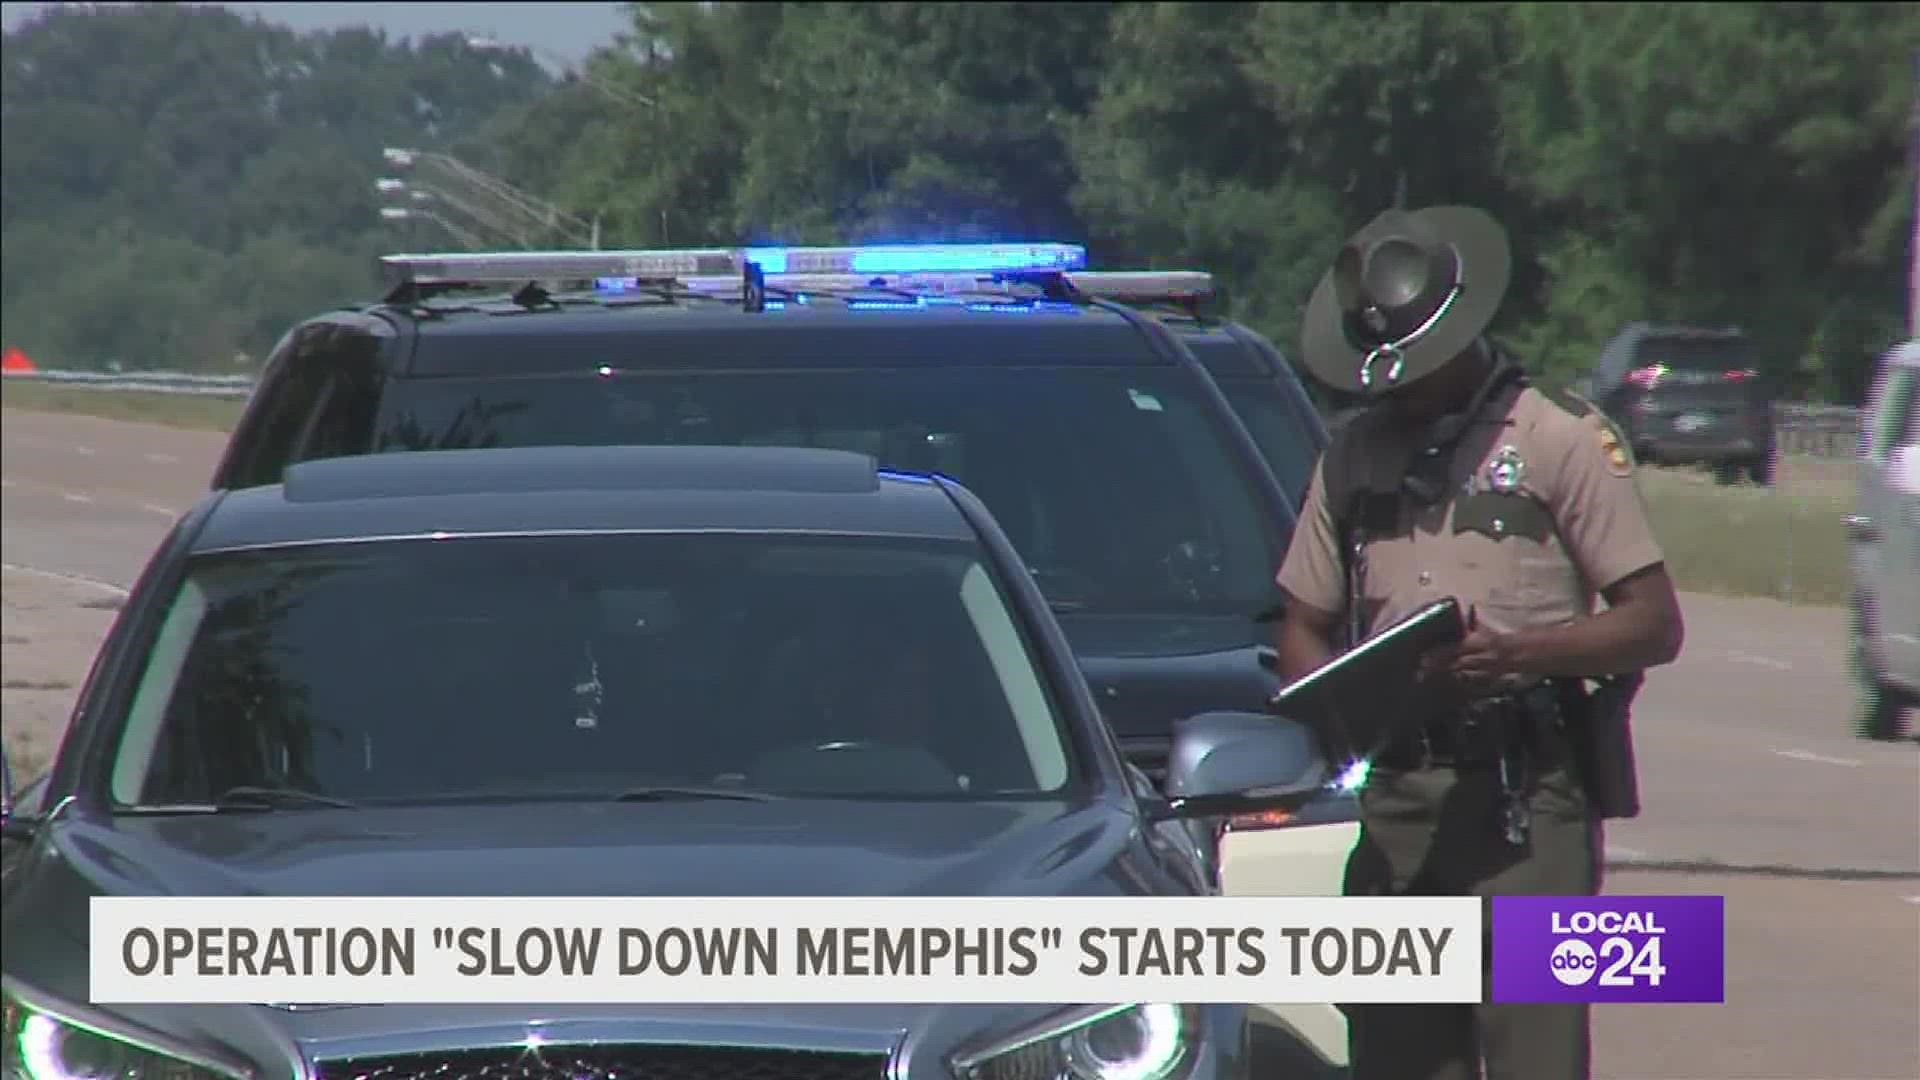 The operation focuses on putting more law enforcement on highways to target all roadway violations, especially shootings.